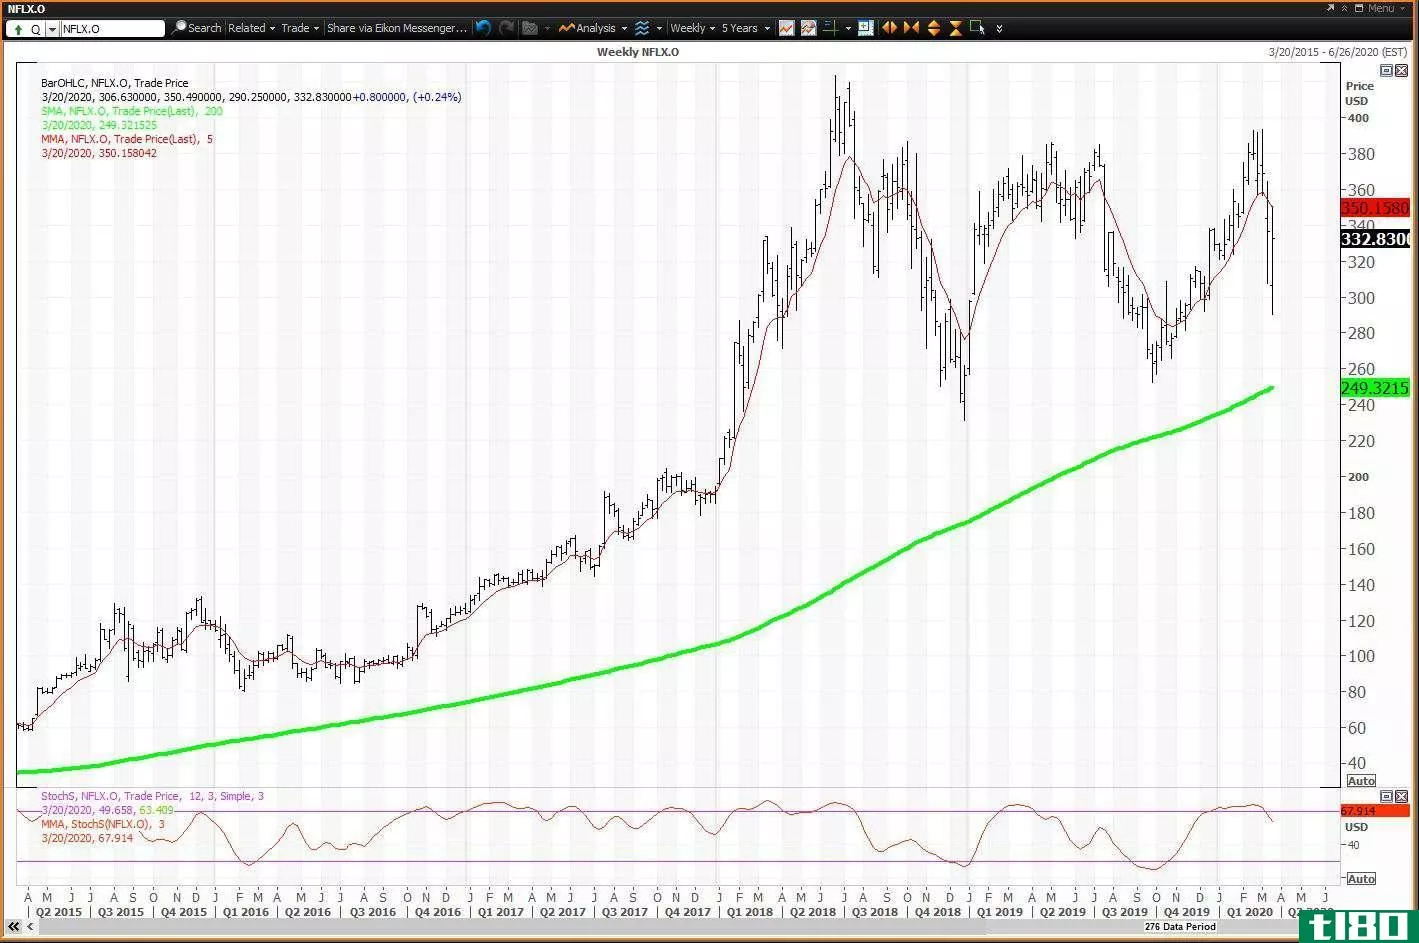 Weekly chart showing the share price performance of Netflix, Inc. (NFLX)